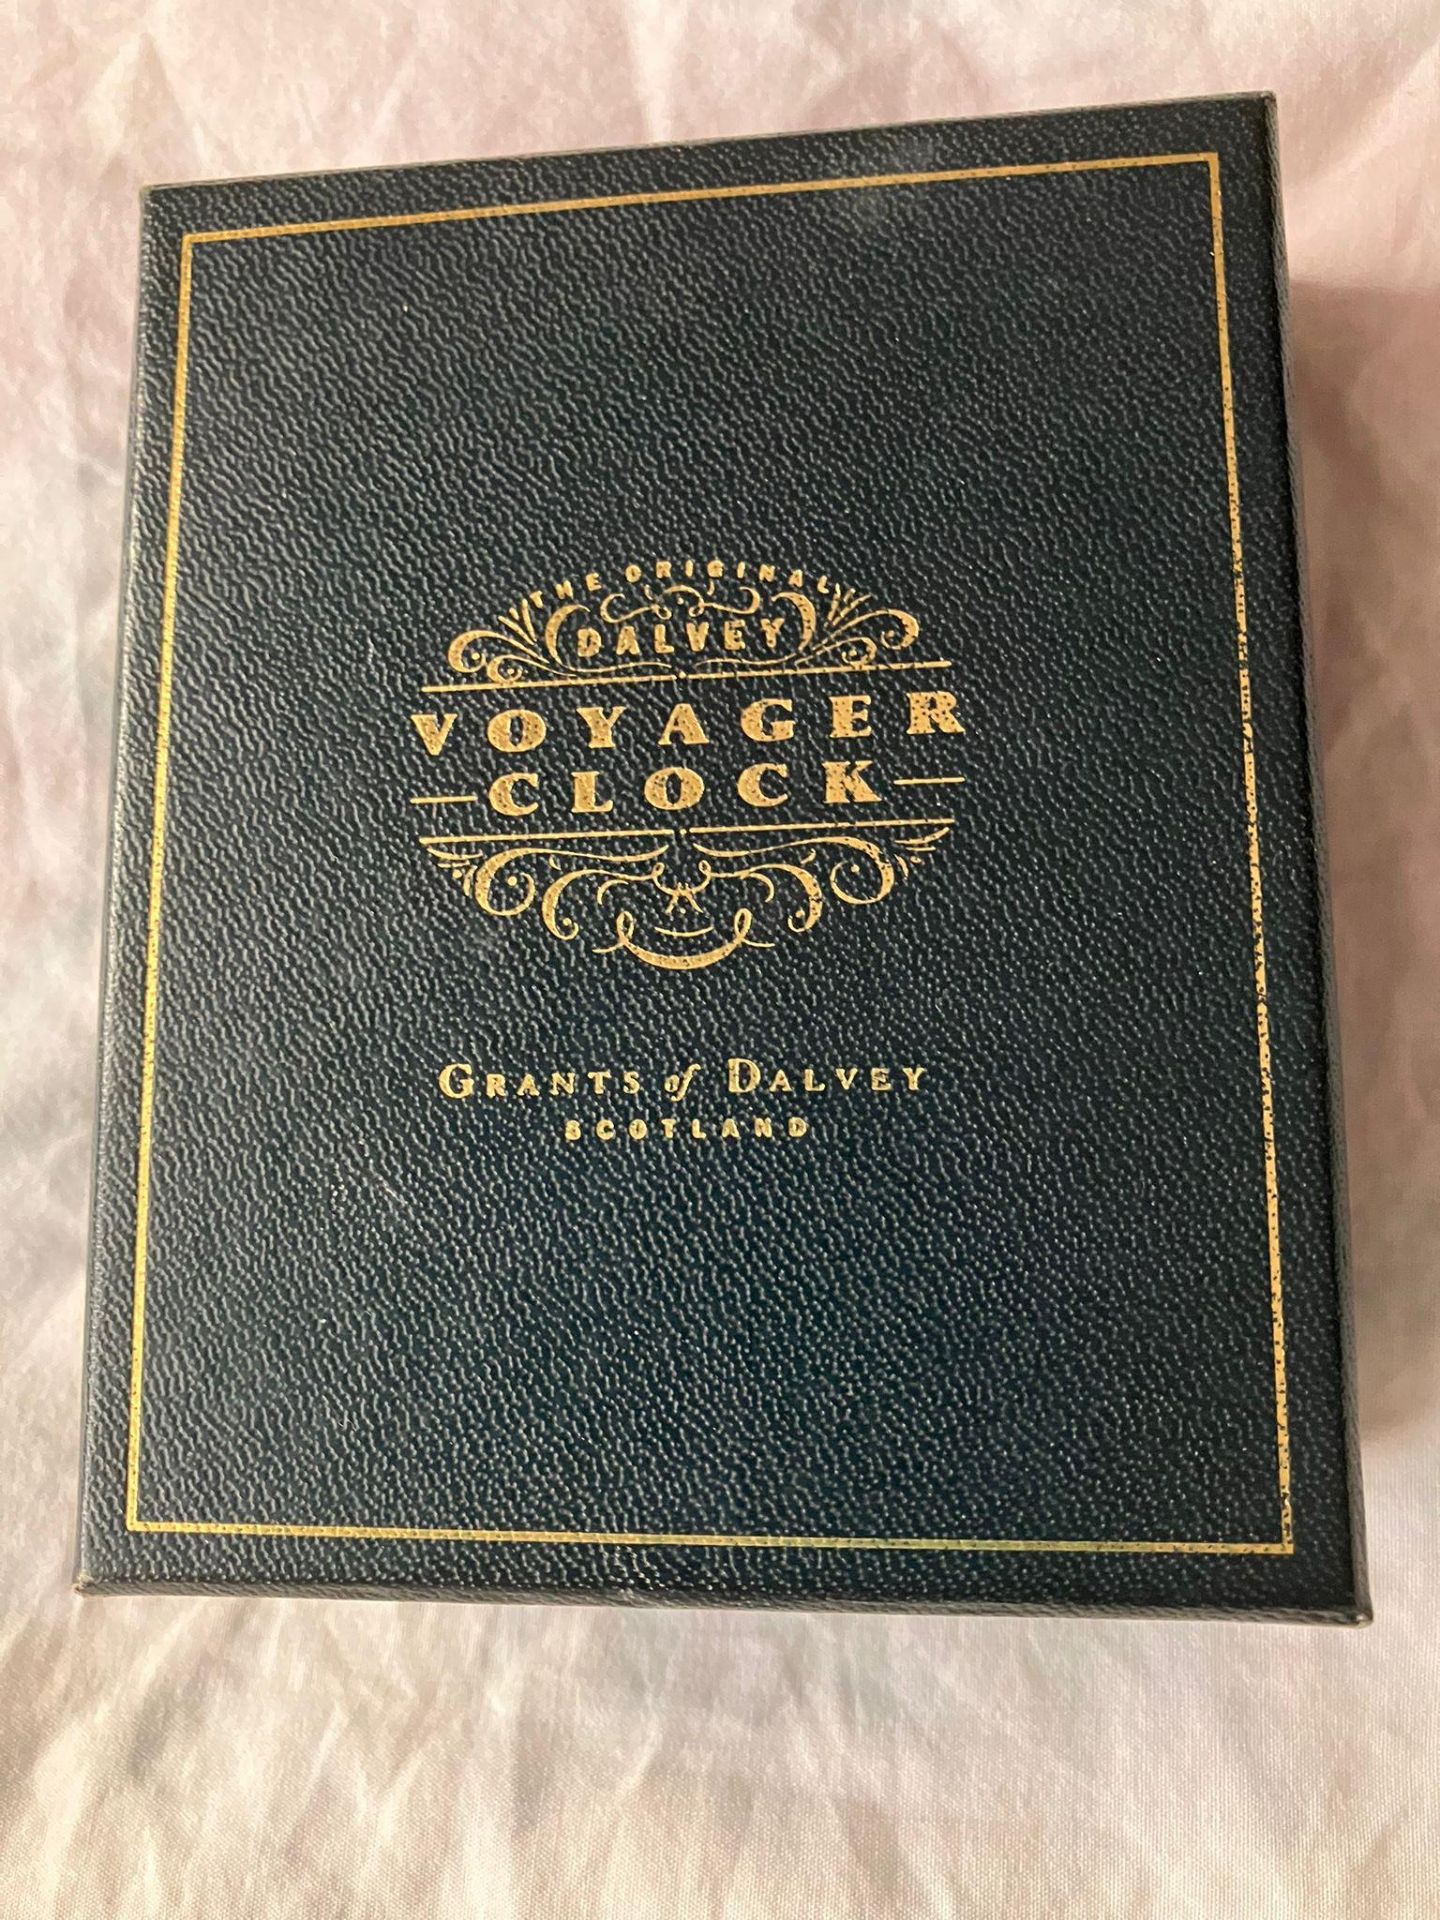 Vintage Grants of Dalvey VOYAGER CLOCK. Complete with original box and instruction Booklet. Quartz - Image 5 of 7